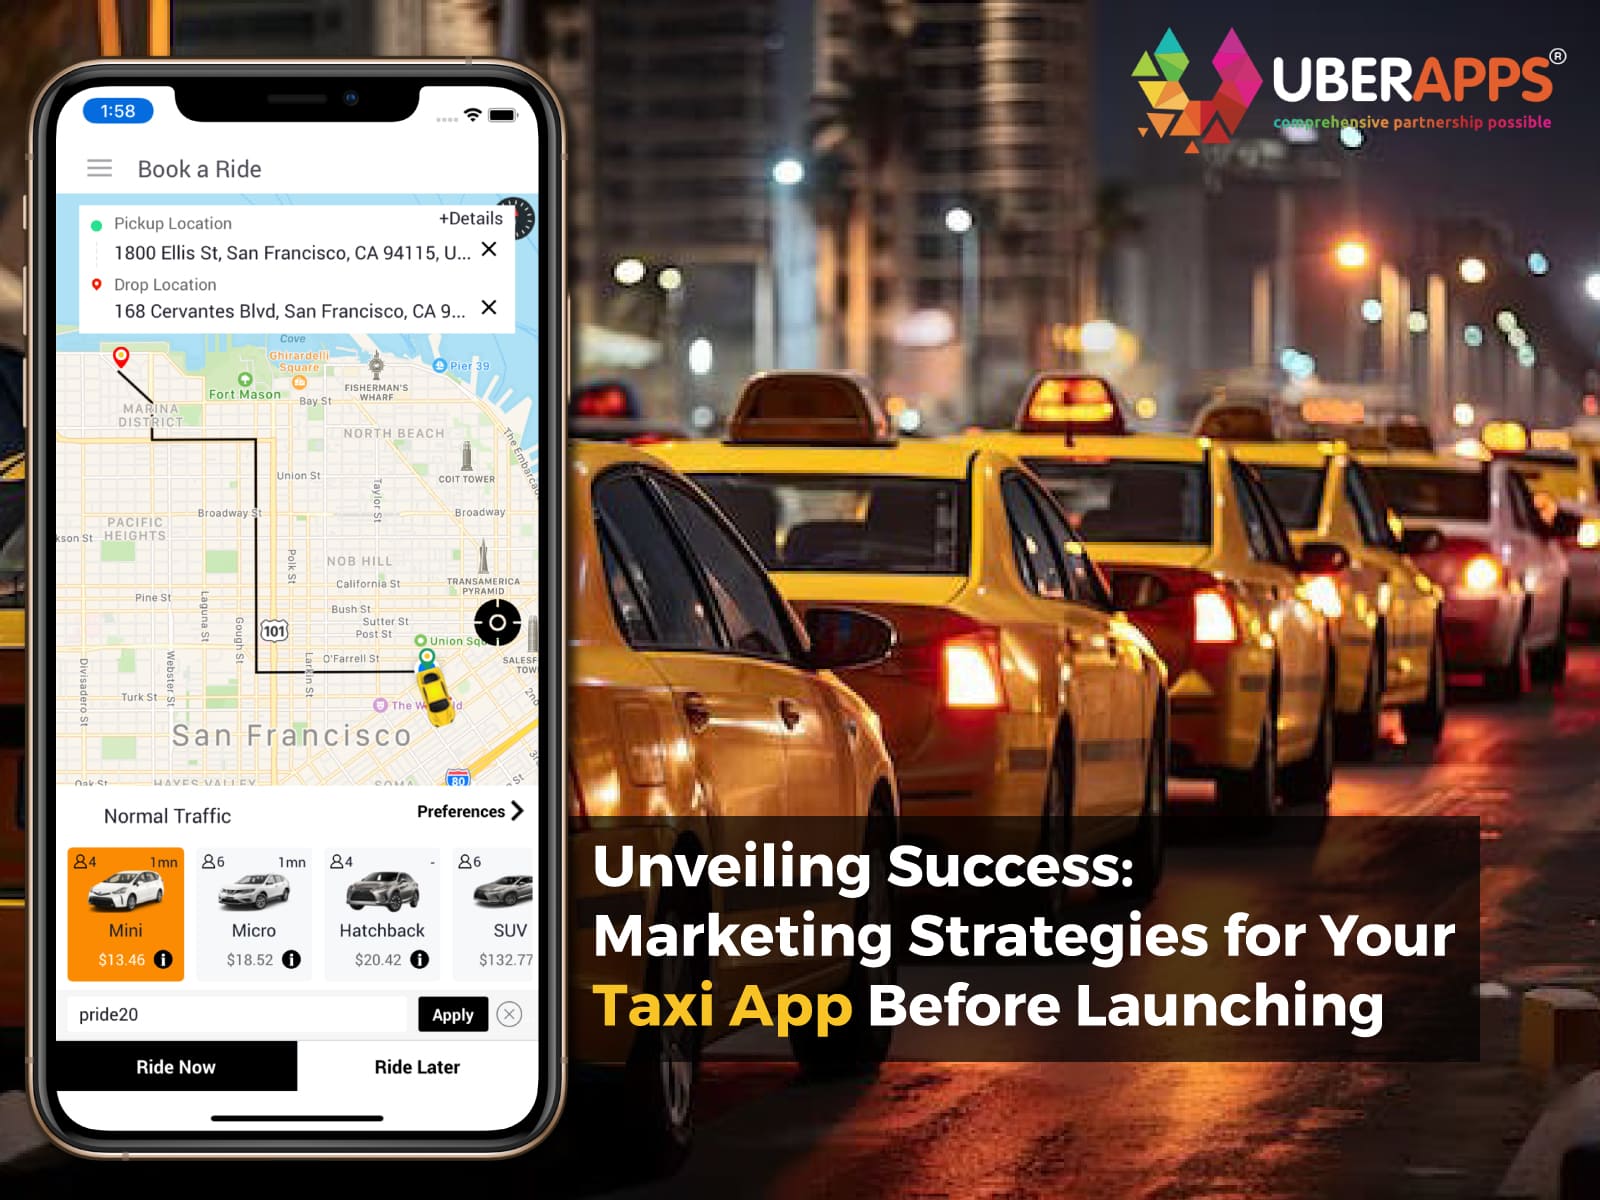 Unveiling Success: Marketing Strategies for Your Taxi App Before Launching